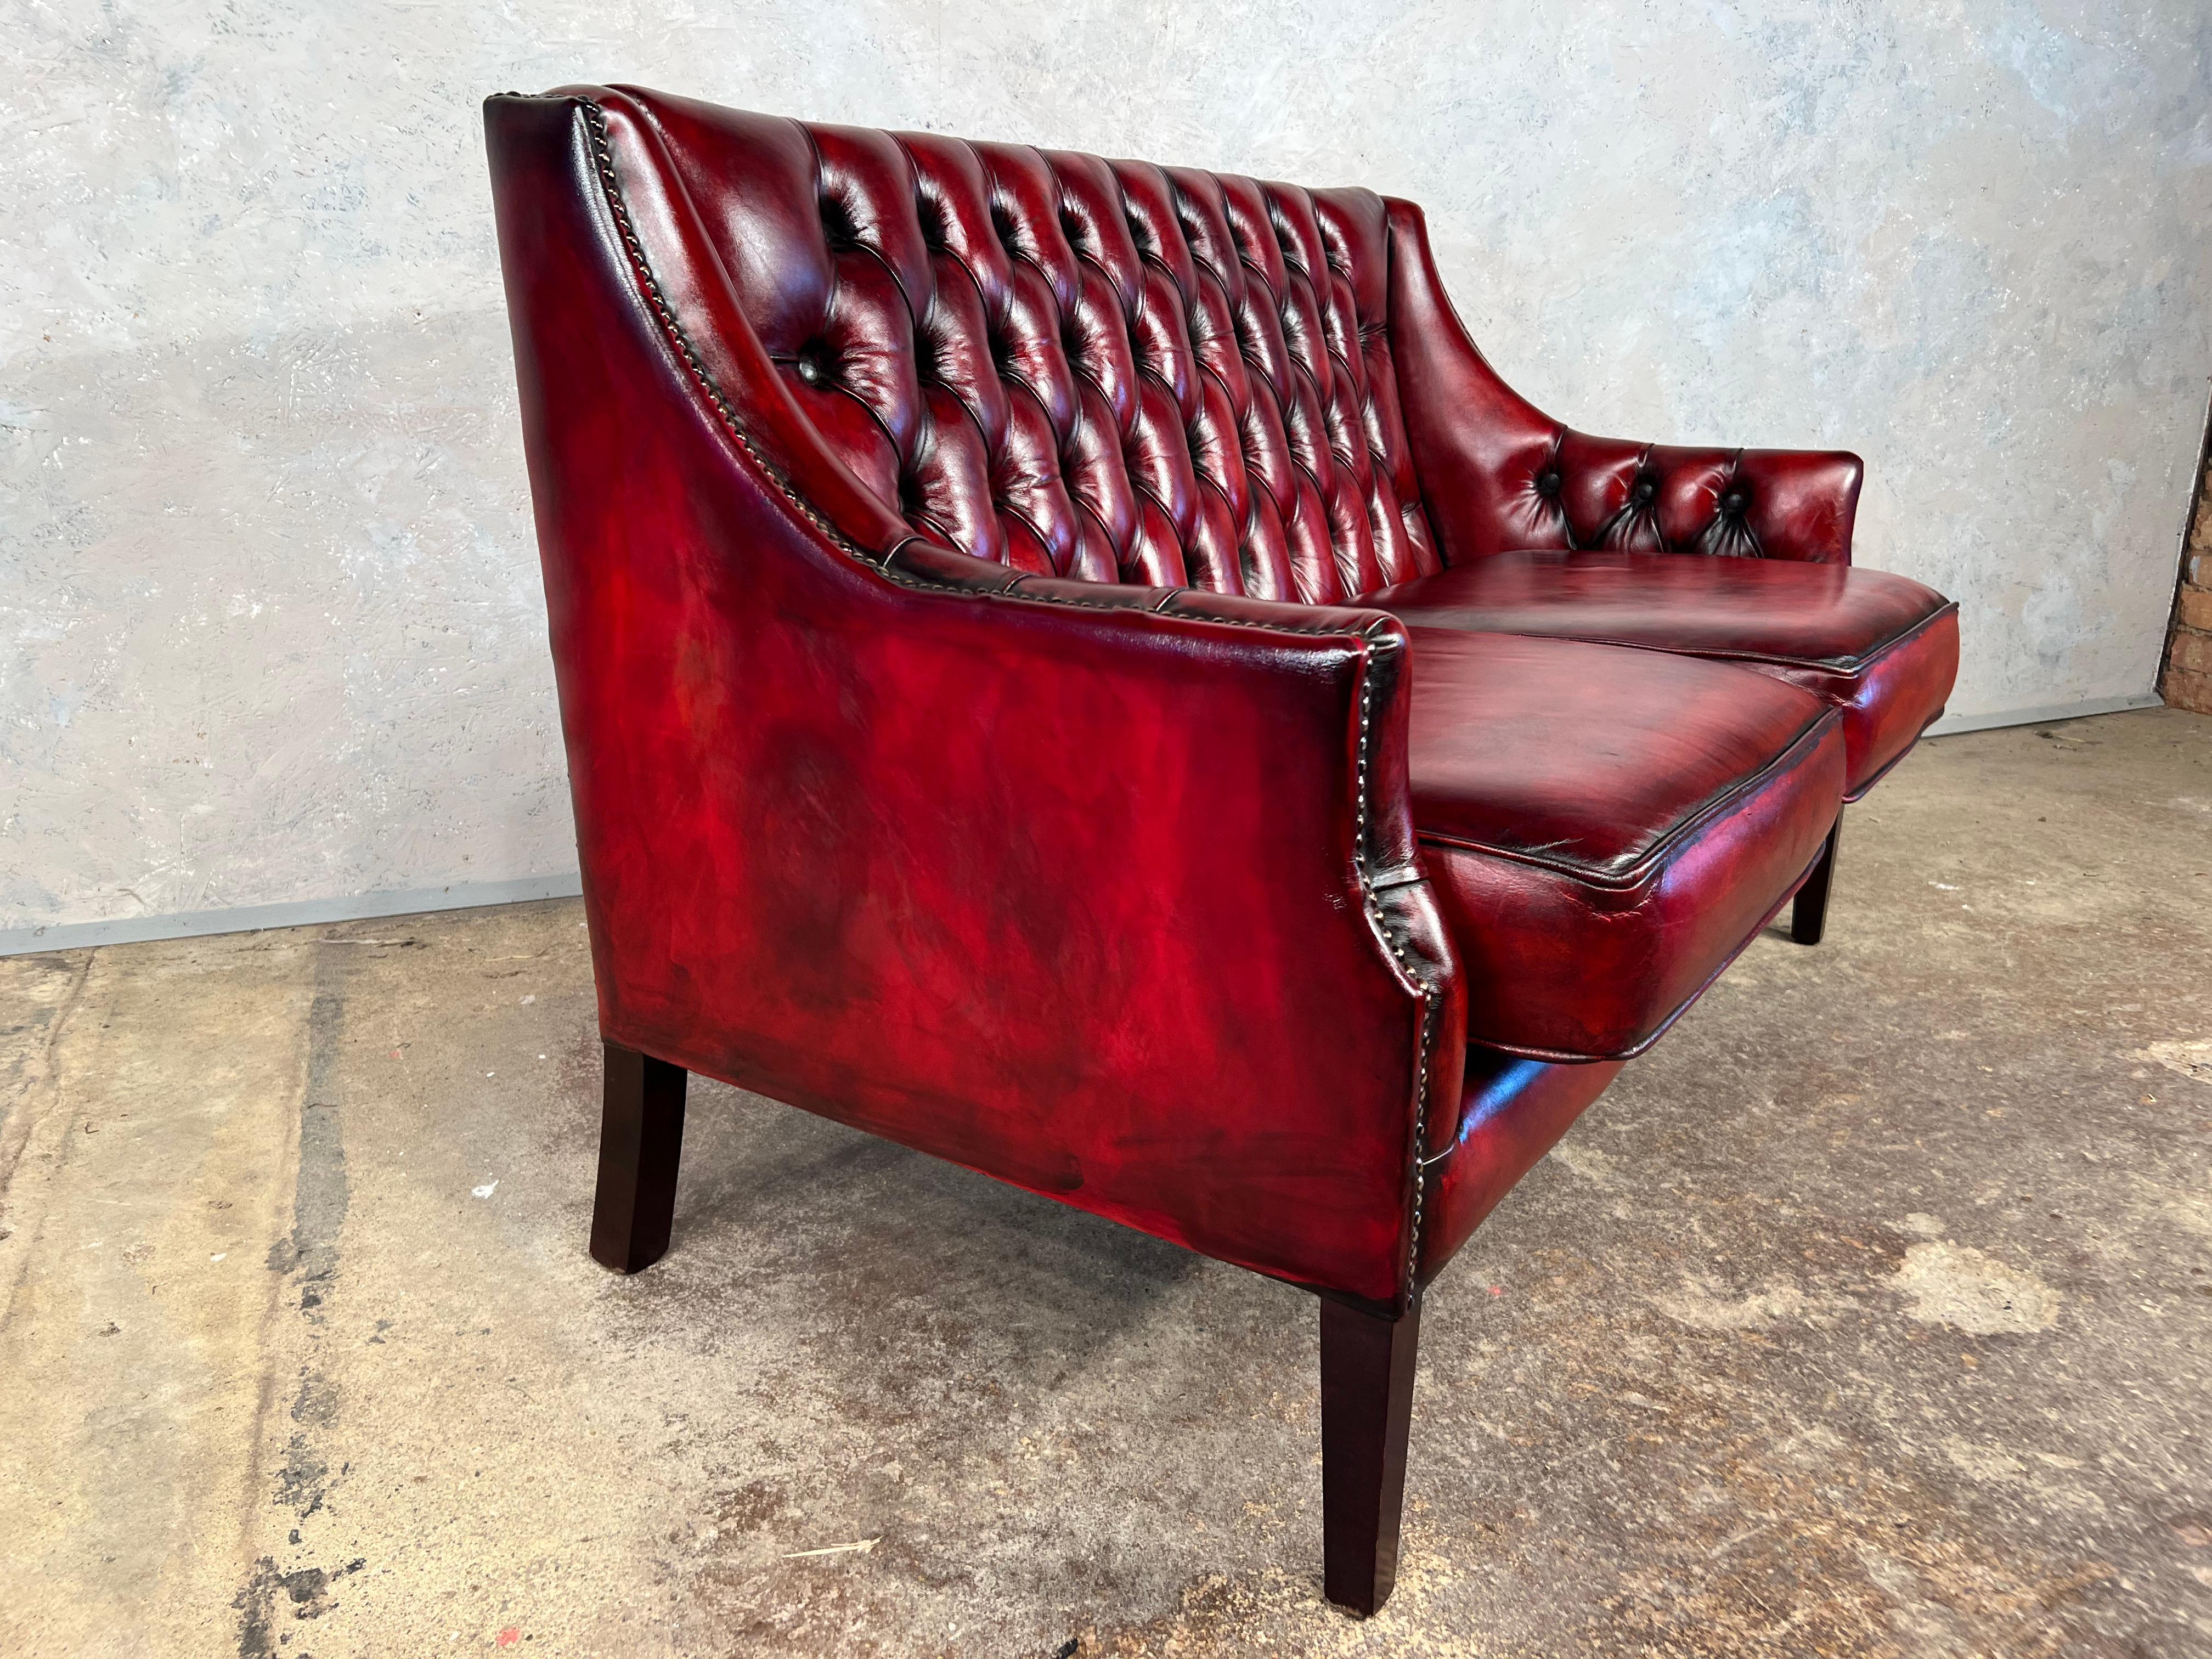 20th Century A Neat Mid C English Made Two Seater Chesterfield Sofa Hand dyed Deep Red #495 For Sale